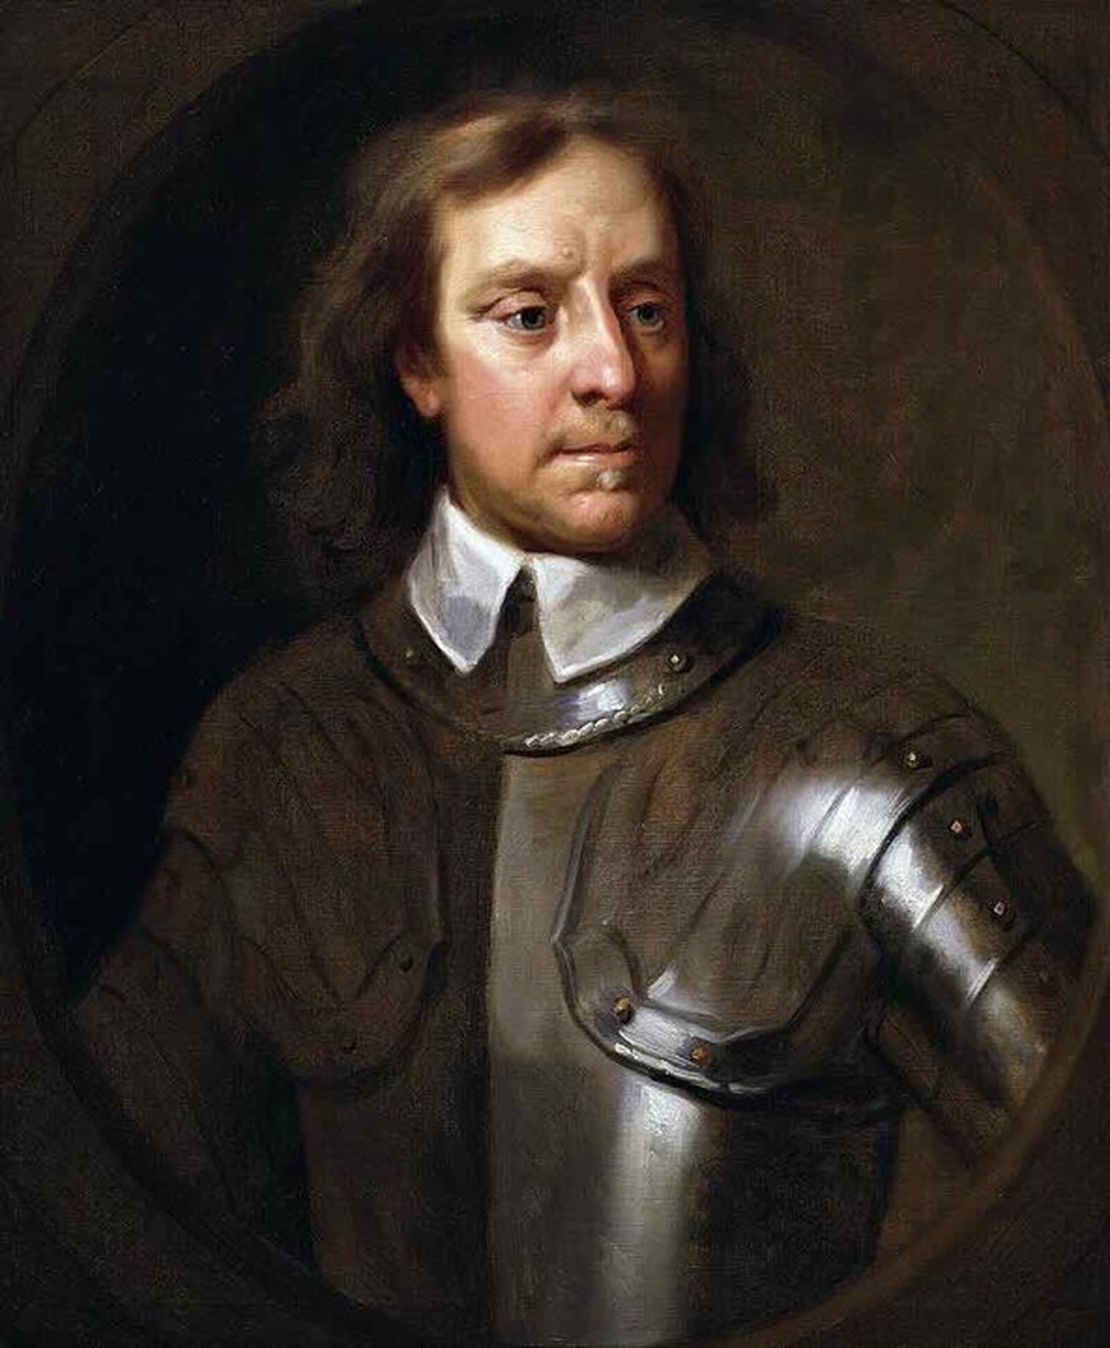 Oliver Cromwell becomes Lord Protector of Ireland